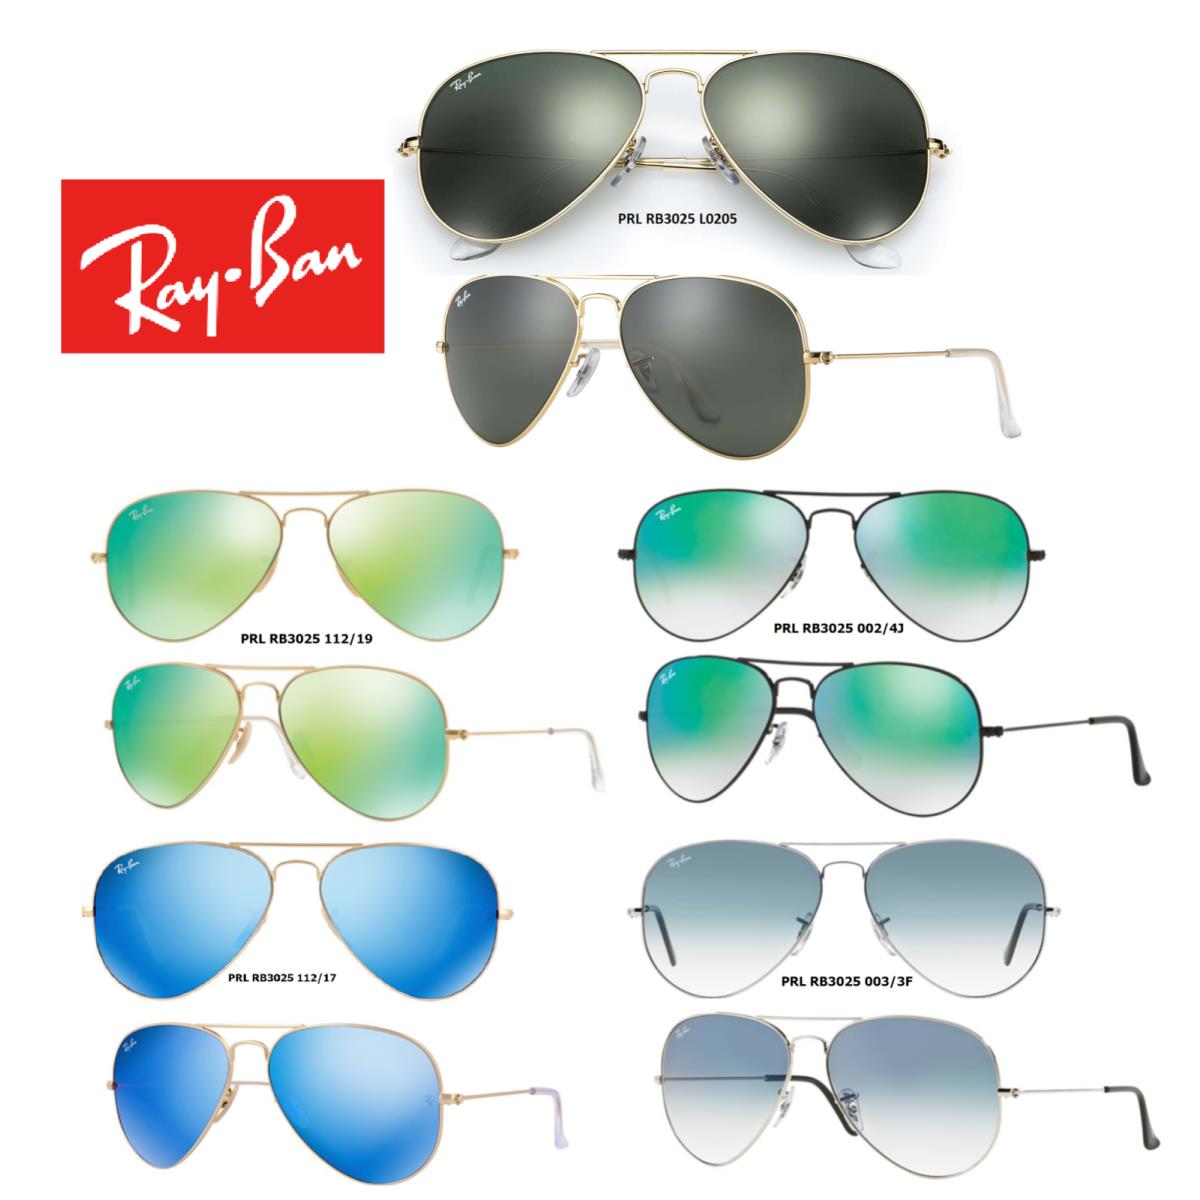 Ray-ban Sunglasses RB3025 Aviator Flash Series Multiple Colors Available - Frame: , Lens: